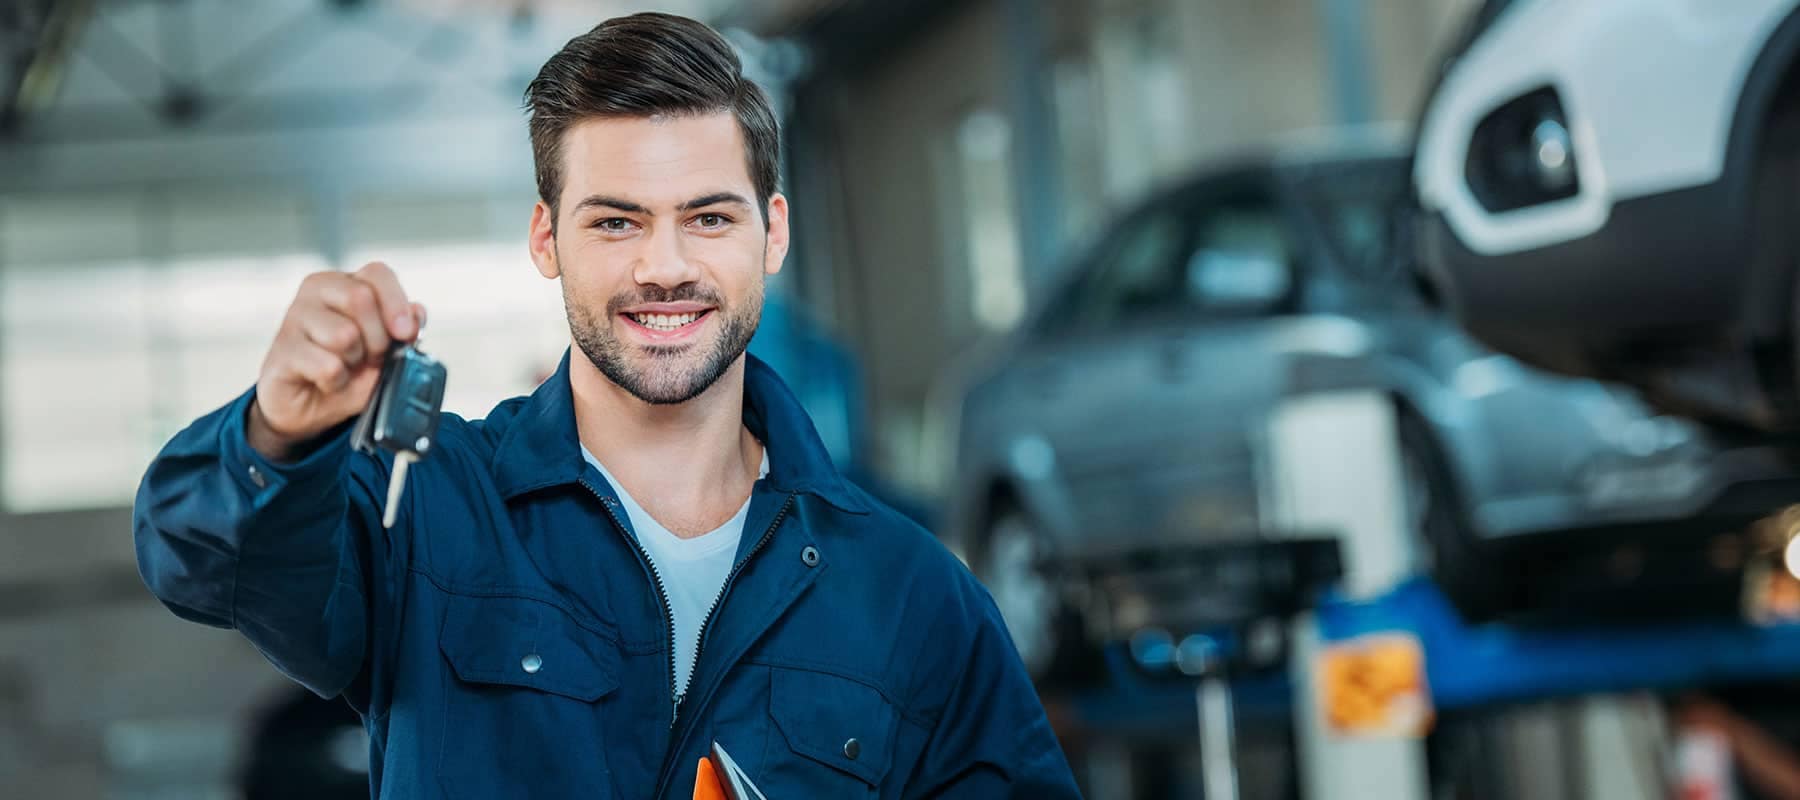 Service picture of technician holding car keys out and smiling